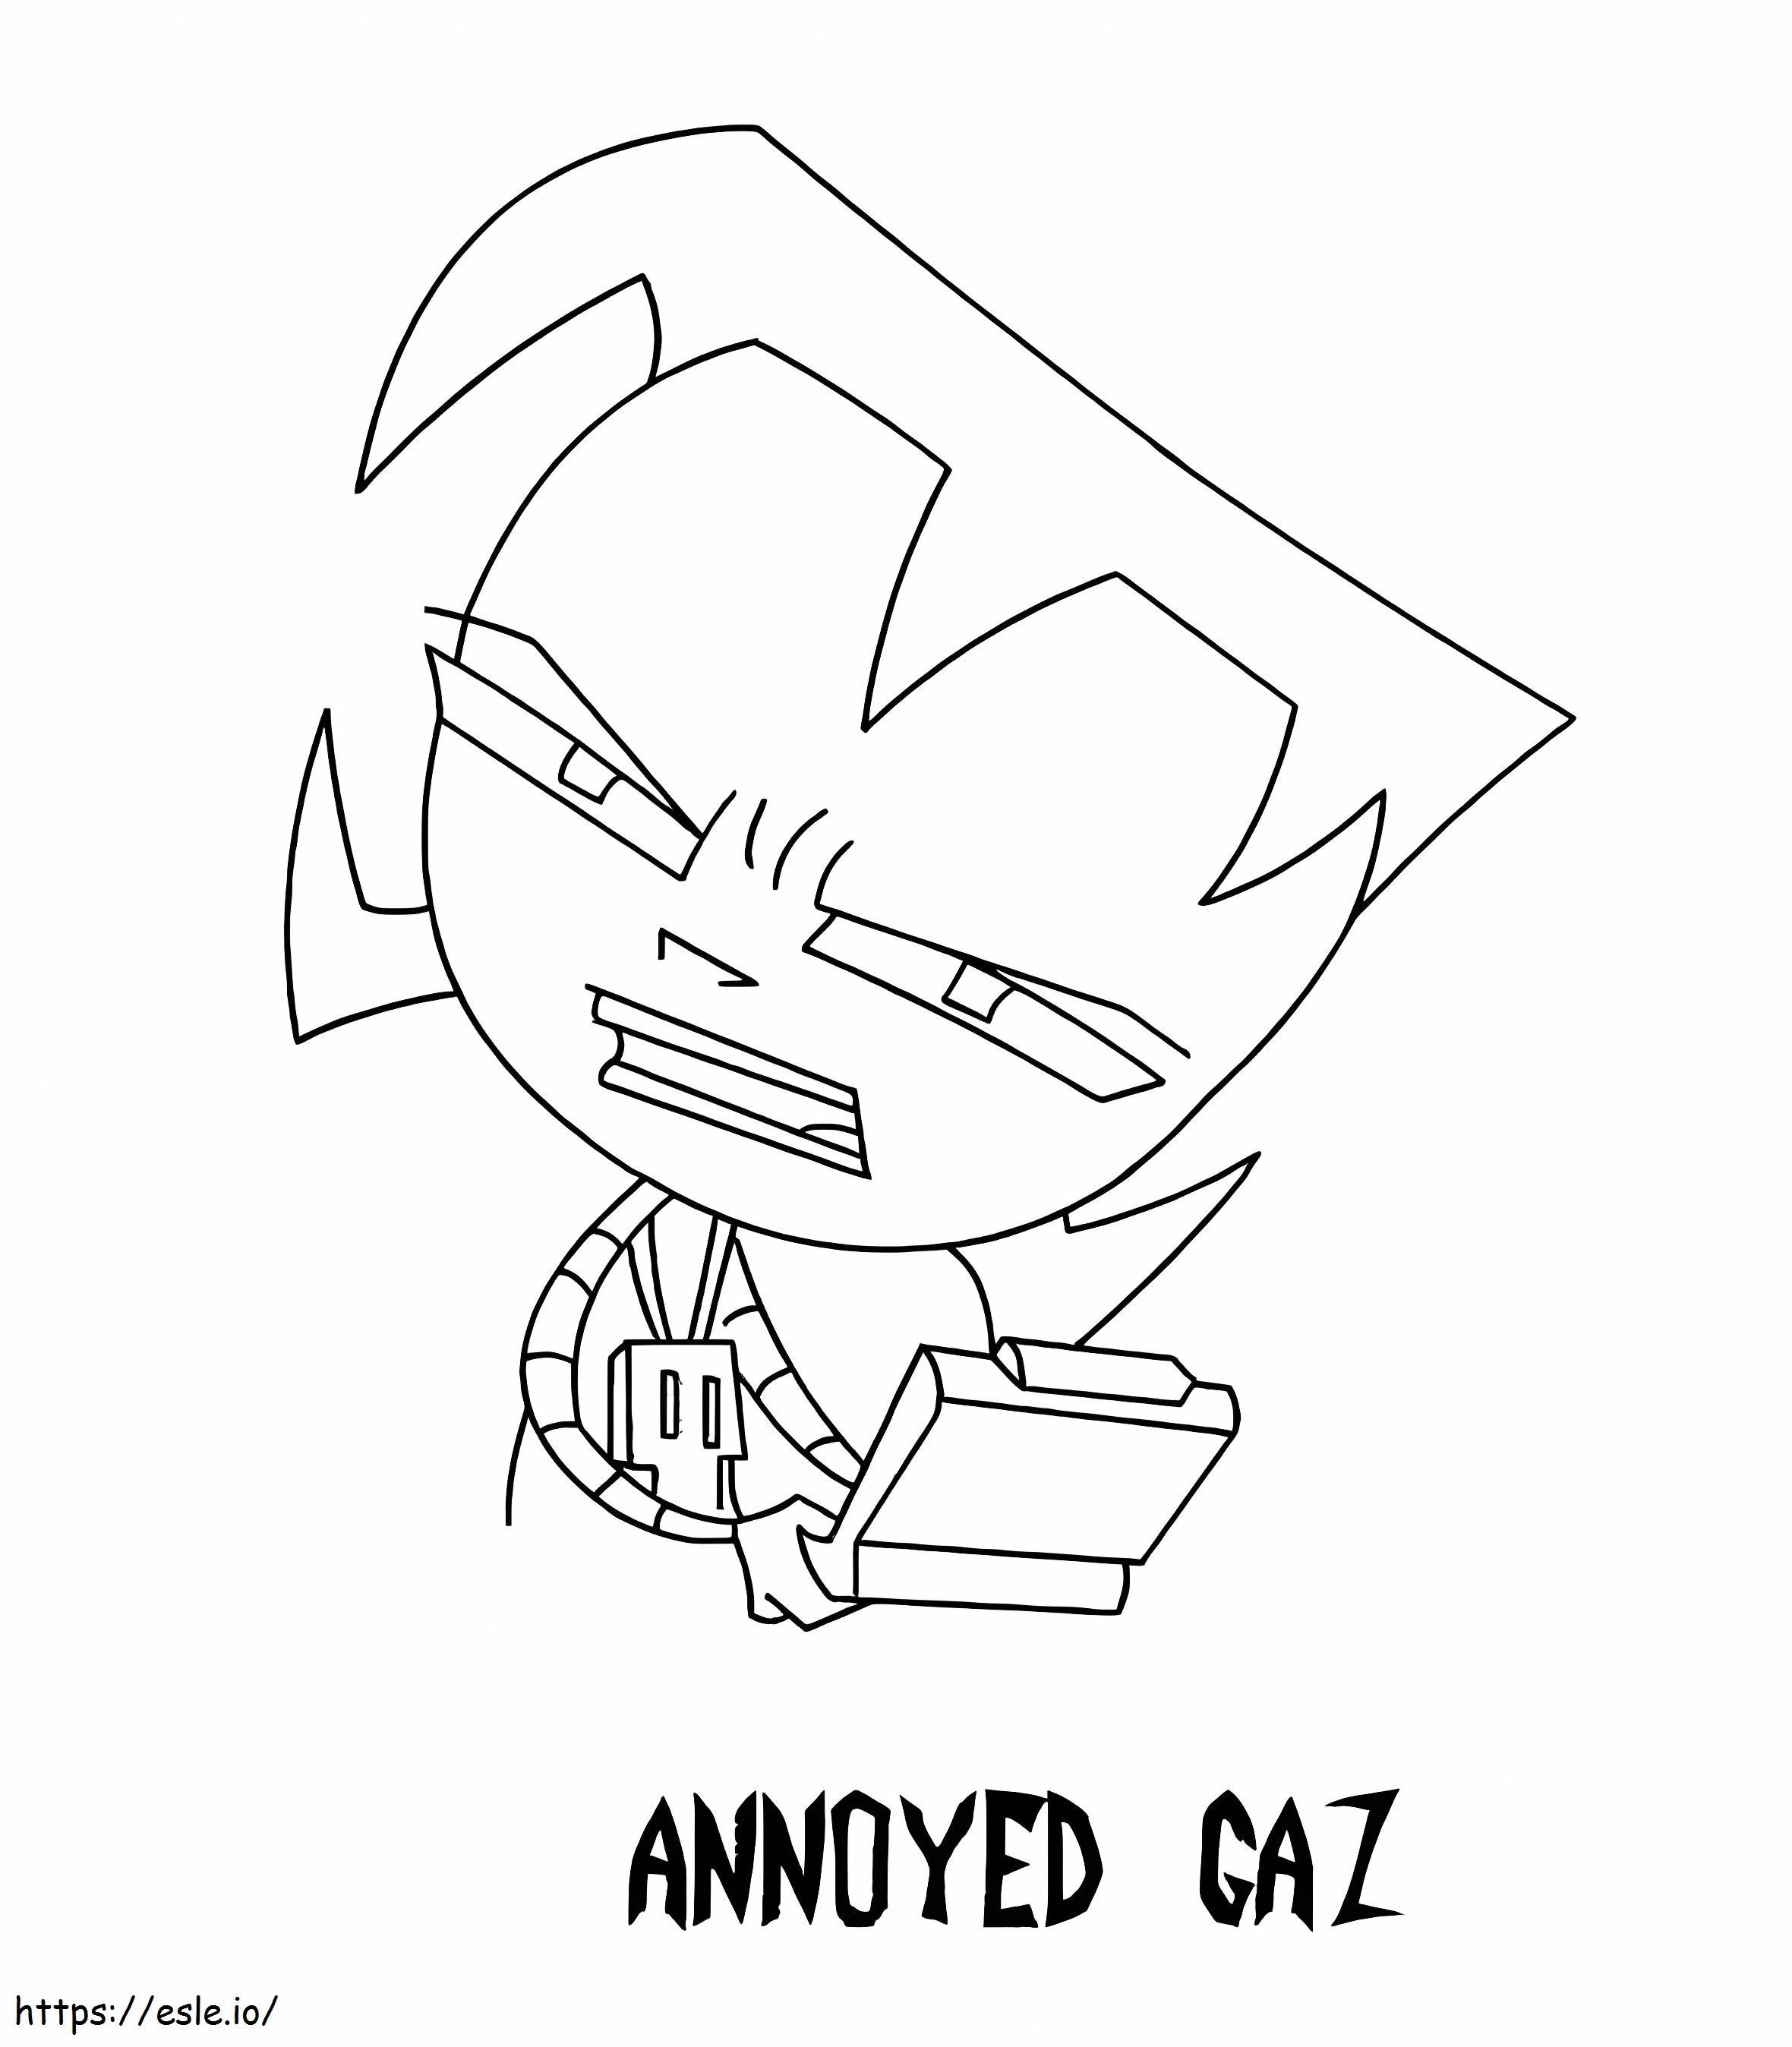 Annoyed Gaz From Invader Zim coloring page